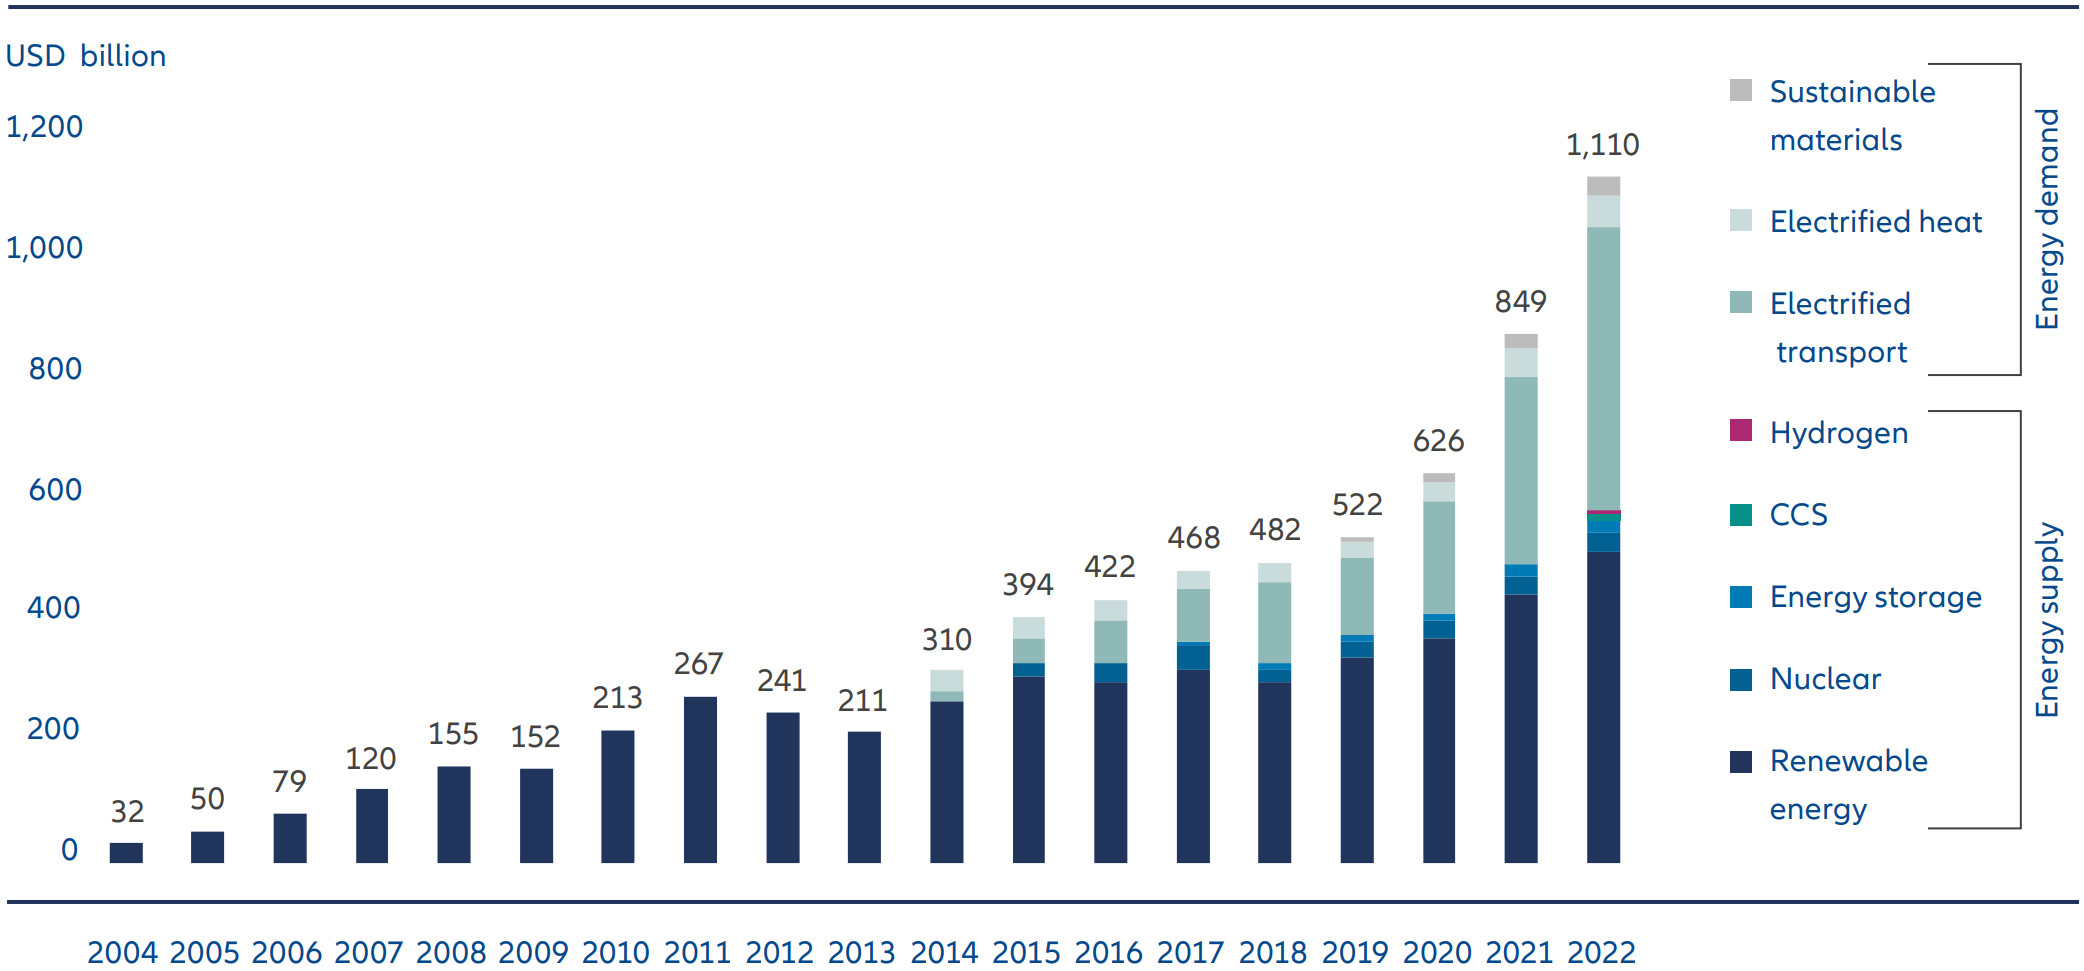 Exhibit 1: Global investment in energy transition by sector (USD billion)